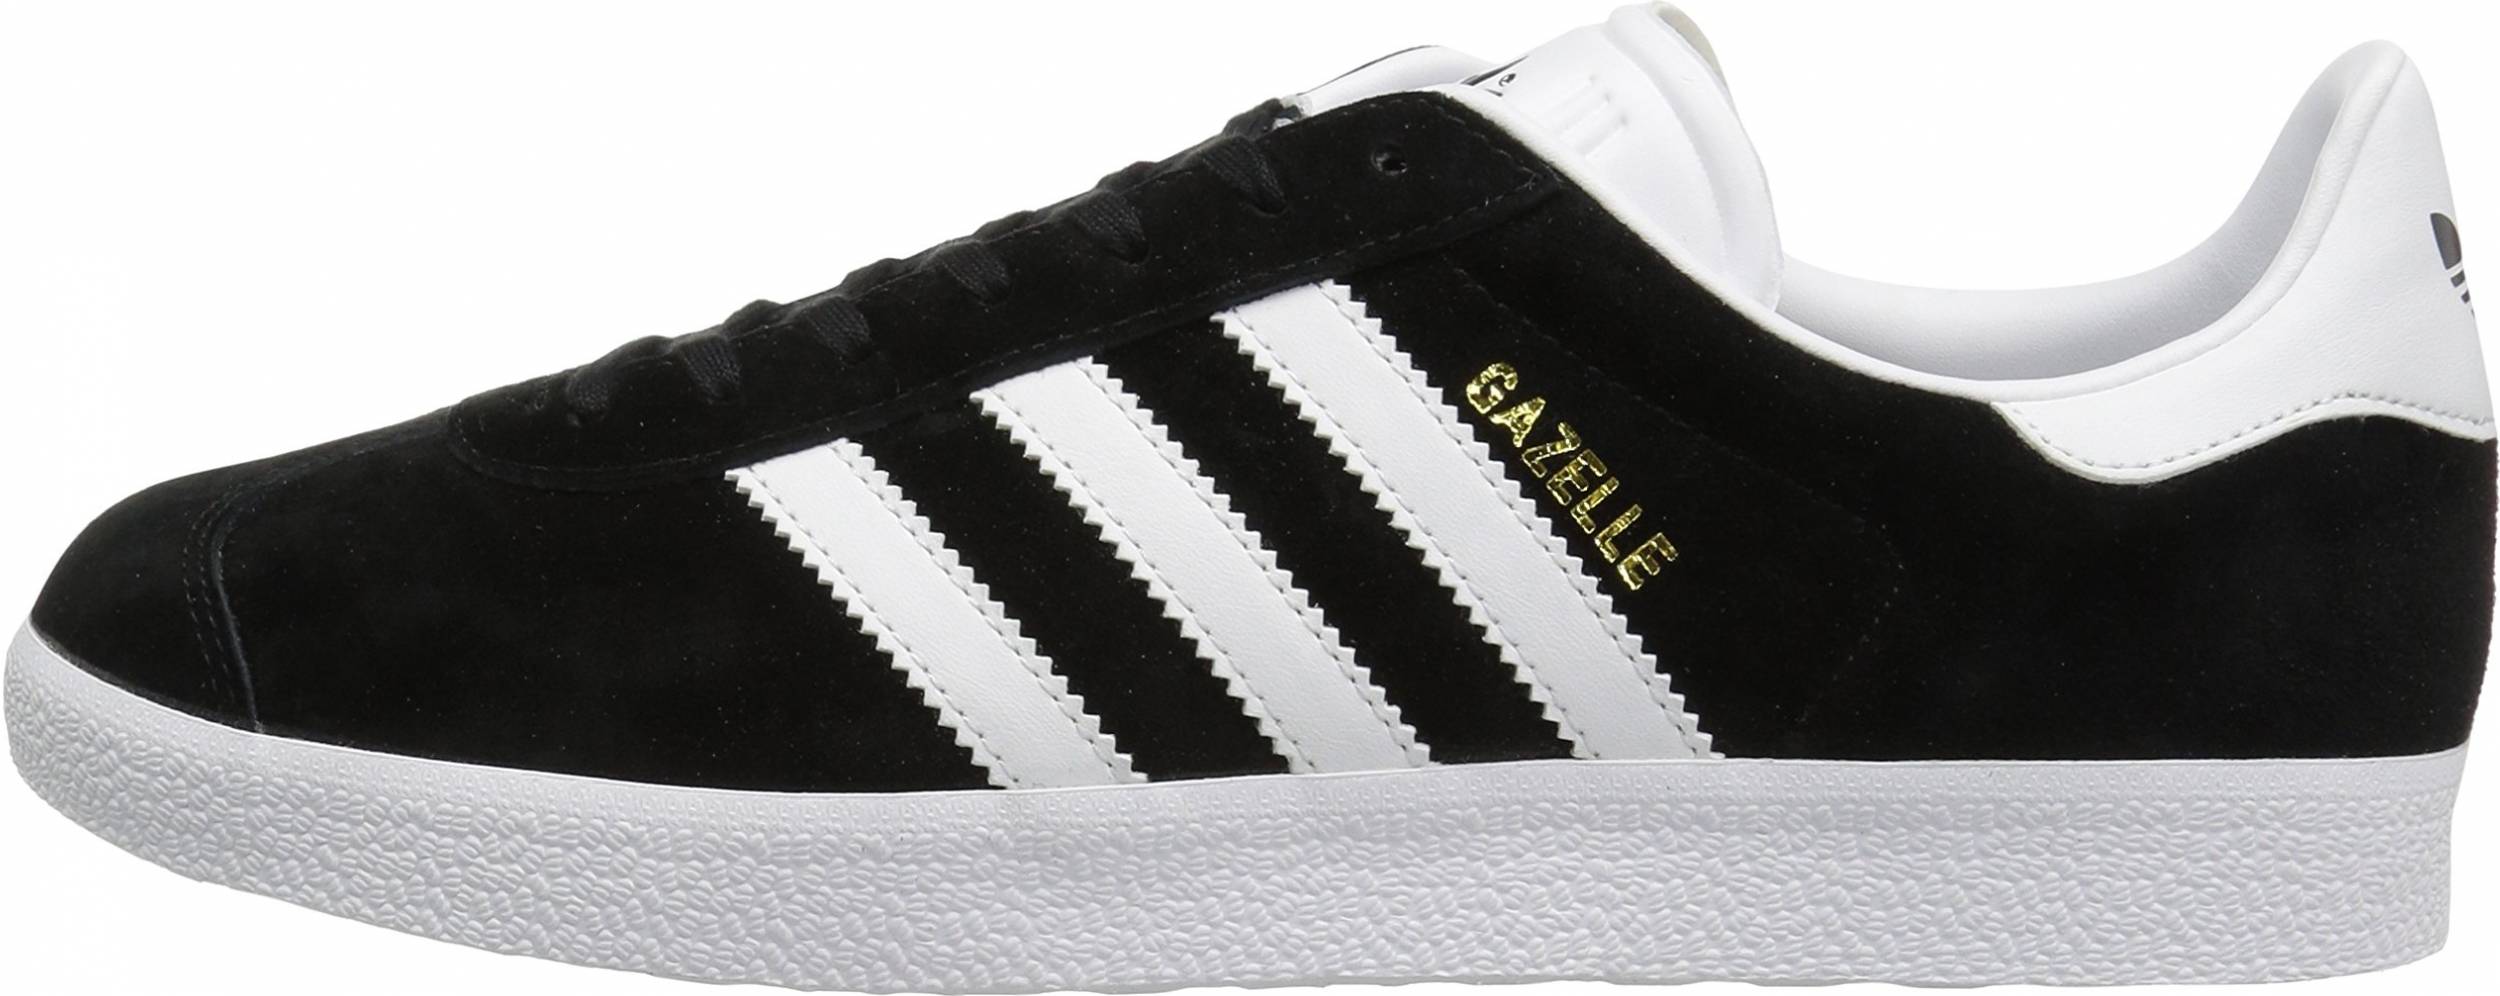 Adidas Gazelle sneakers in 50+ colors (only $46) | RunRepeat الحقل